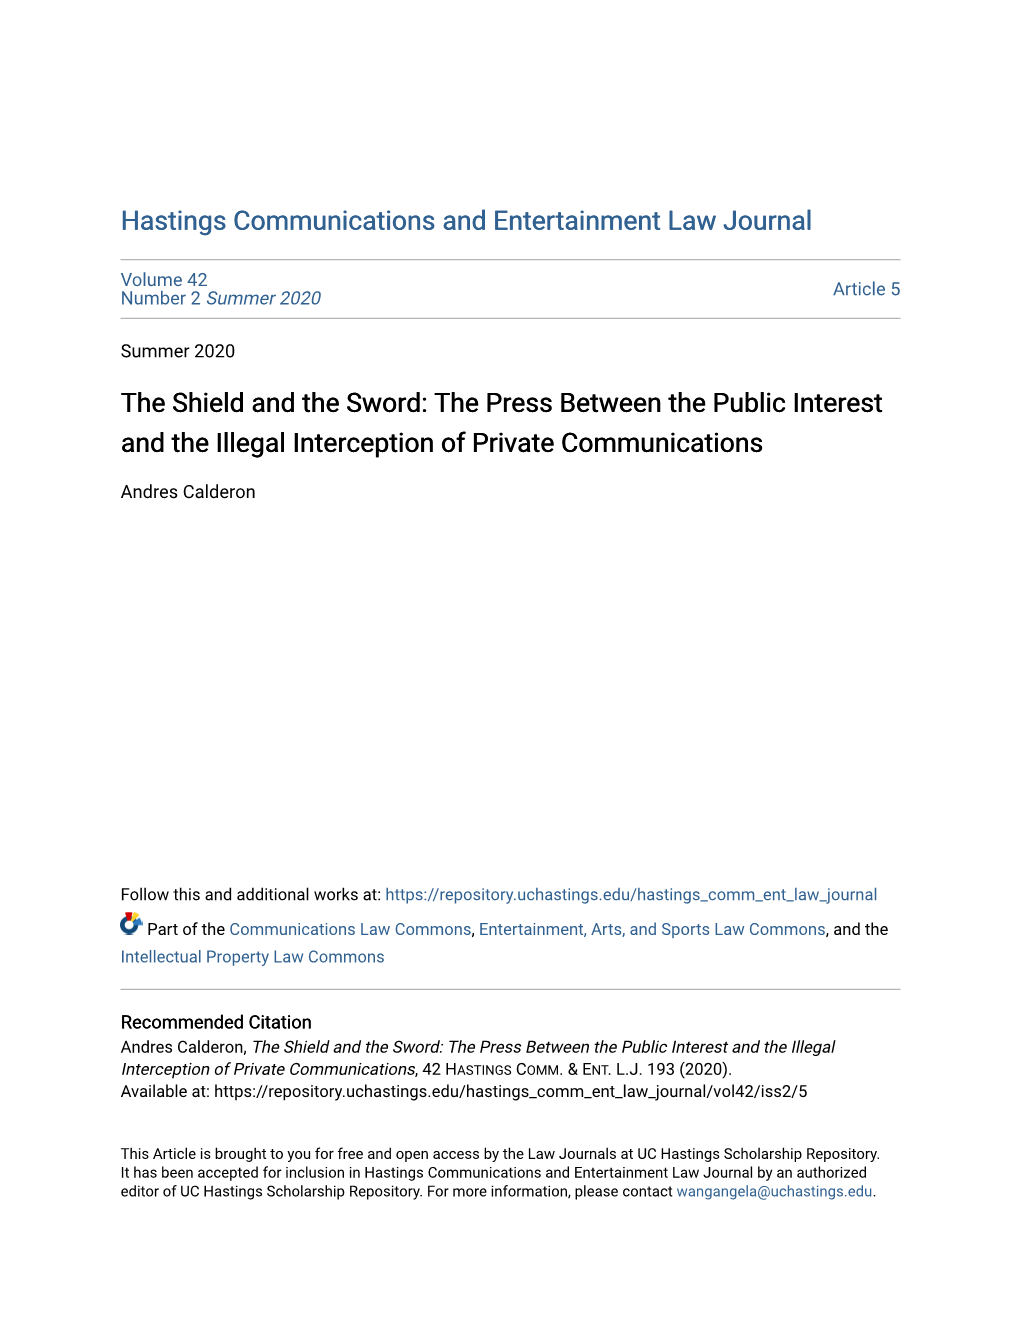 The Shield and the Sword: the Press Between the Public Interest and the Illegal Interception of Private Communications